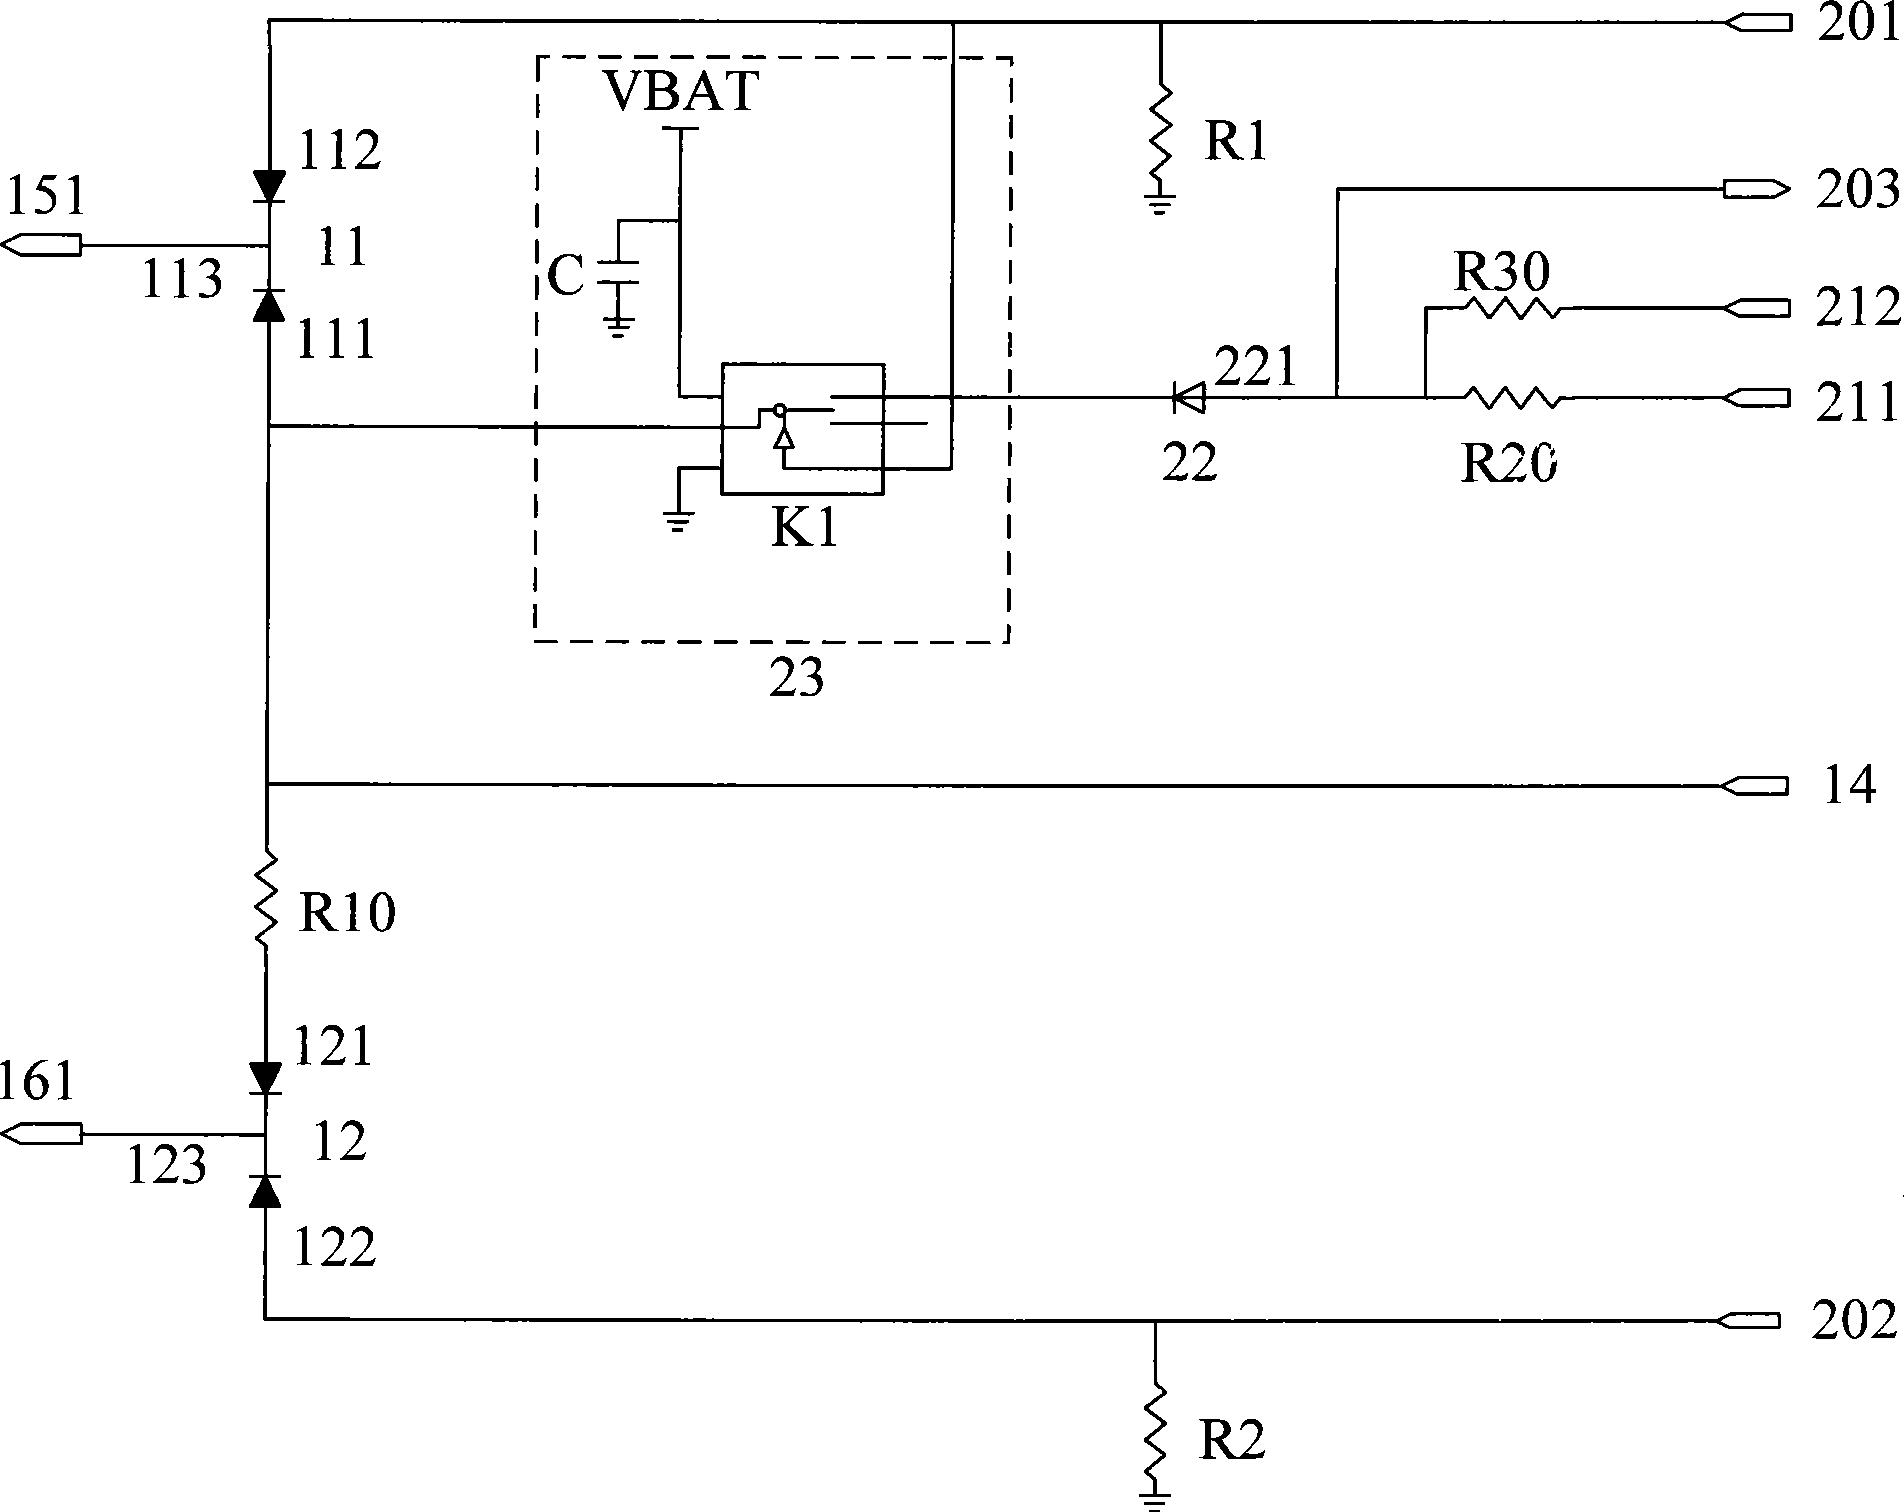 A mobile phone switch circuit and a mobile phone architecture based on the circuit